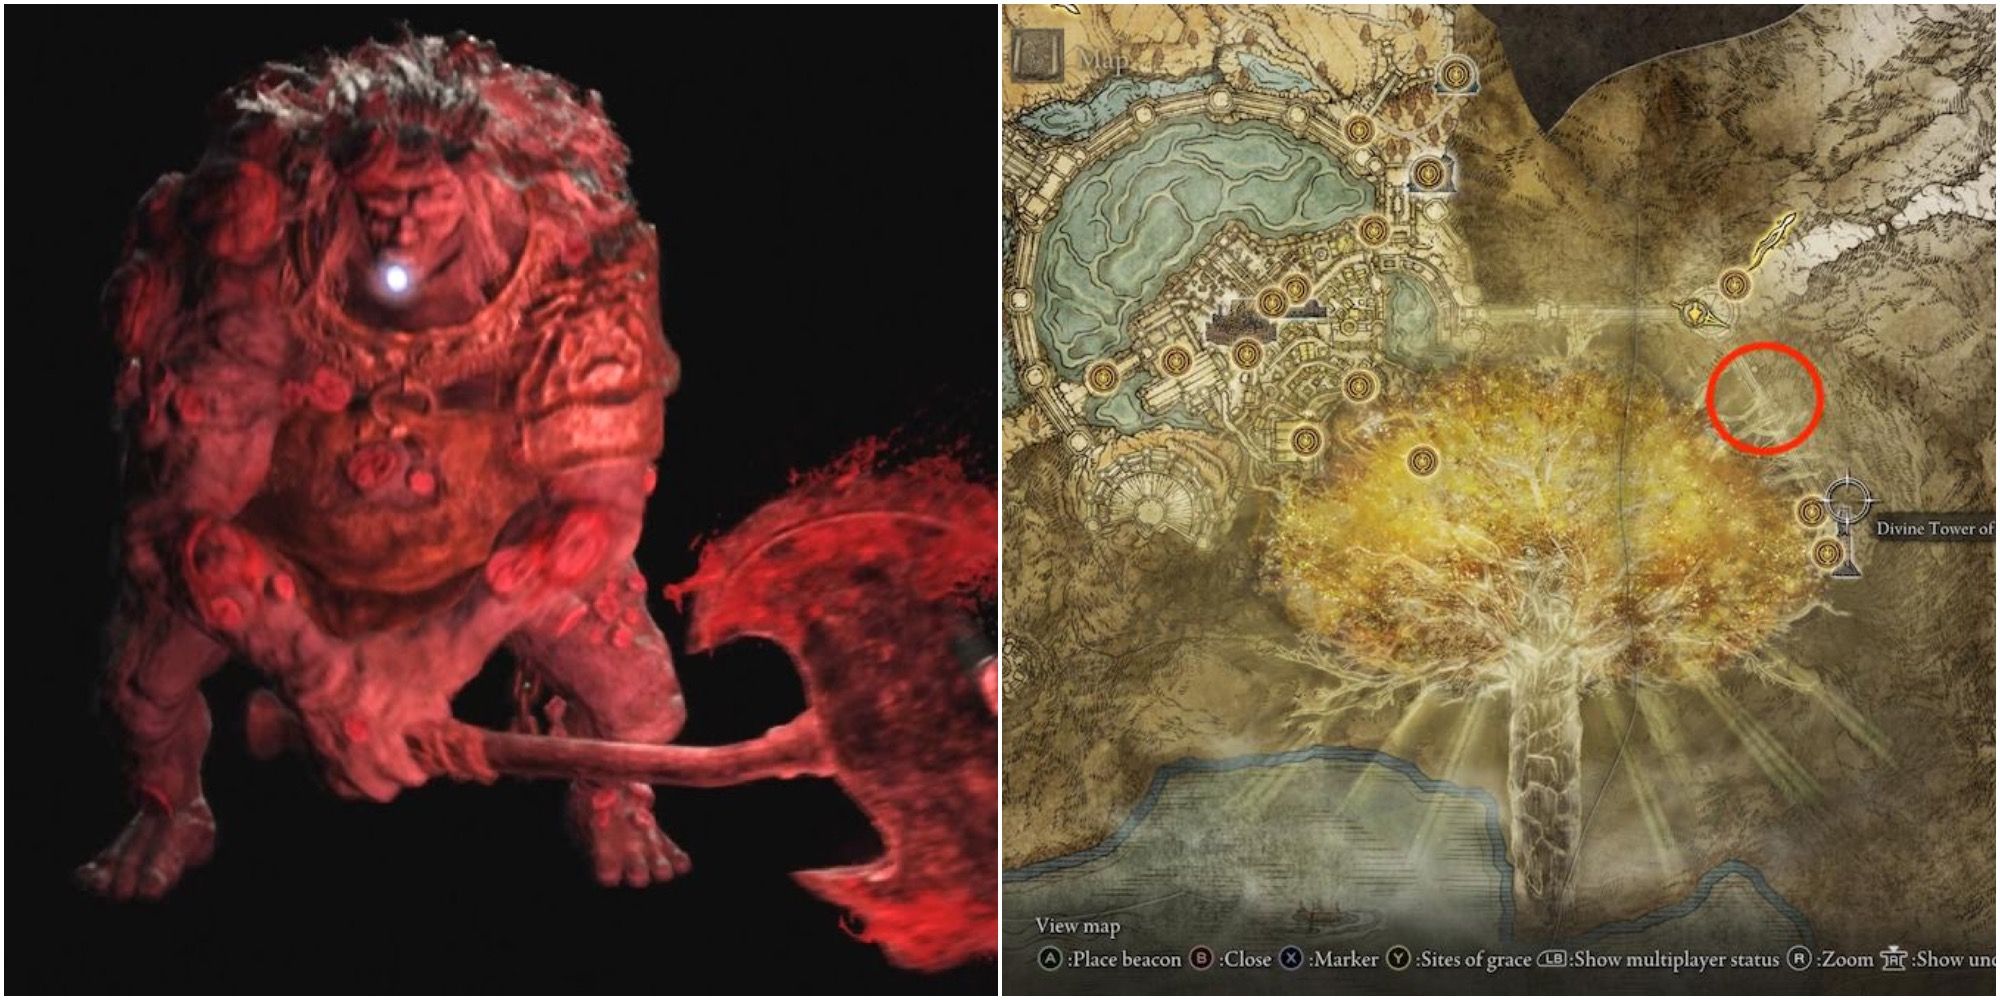 Picture of Fell Twin that wields an axe on the left, and picture of the map with the location circled on the right.